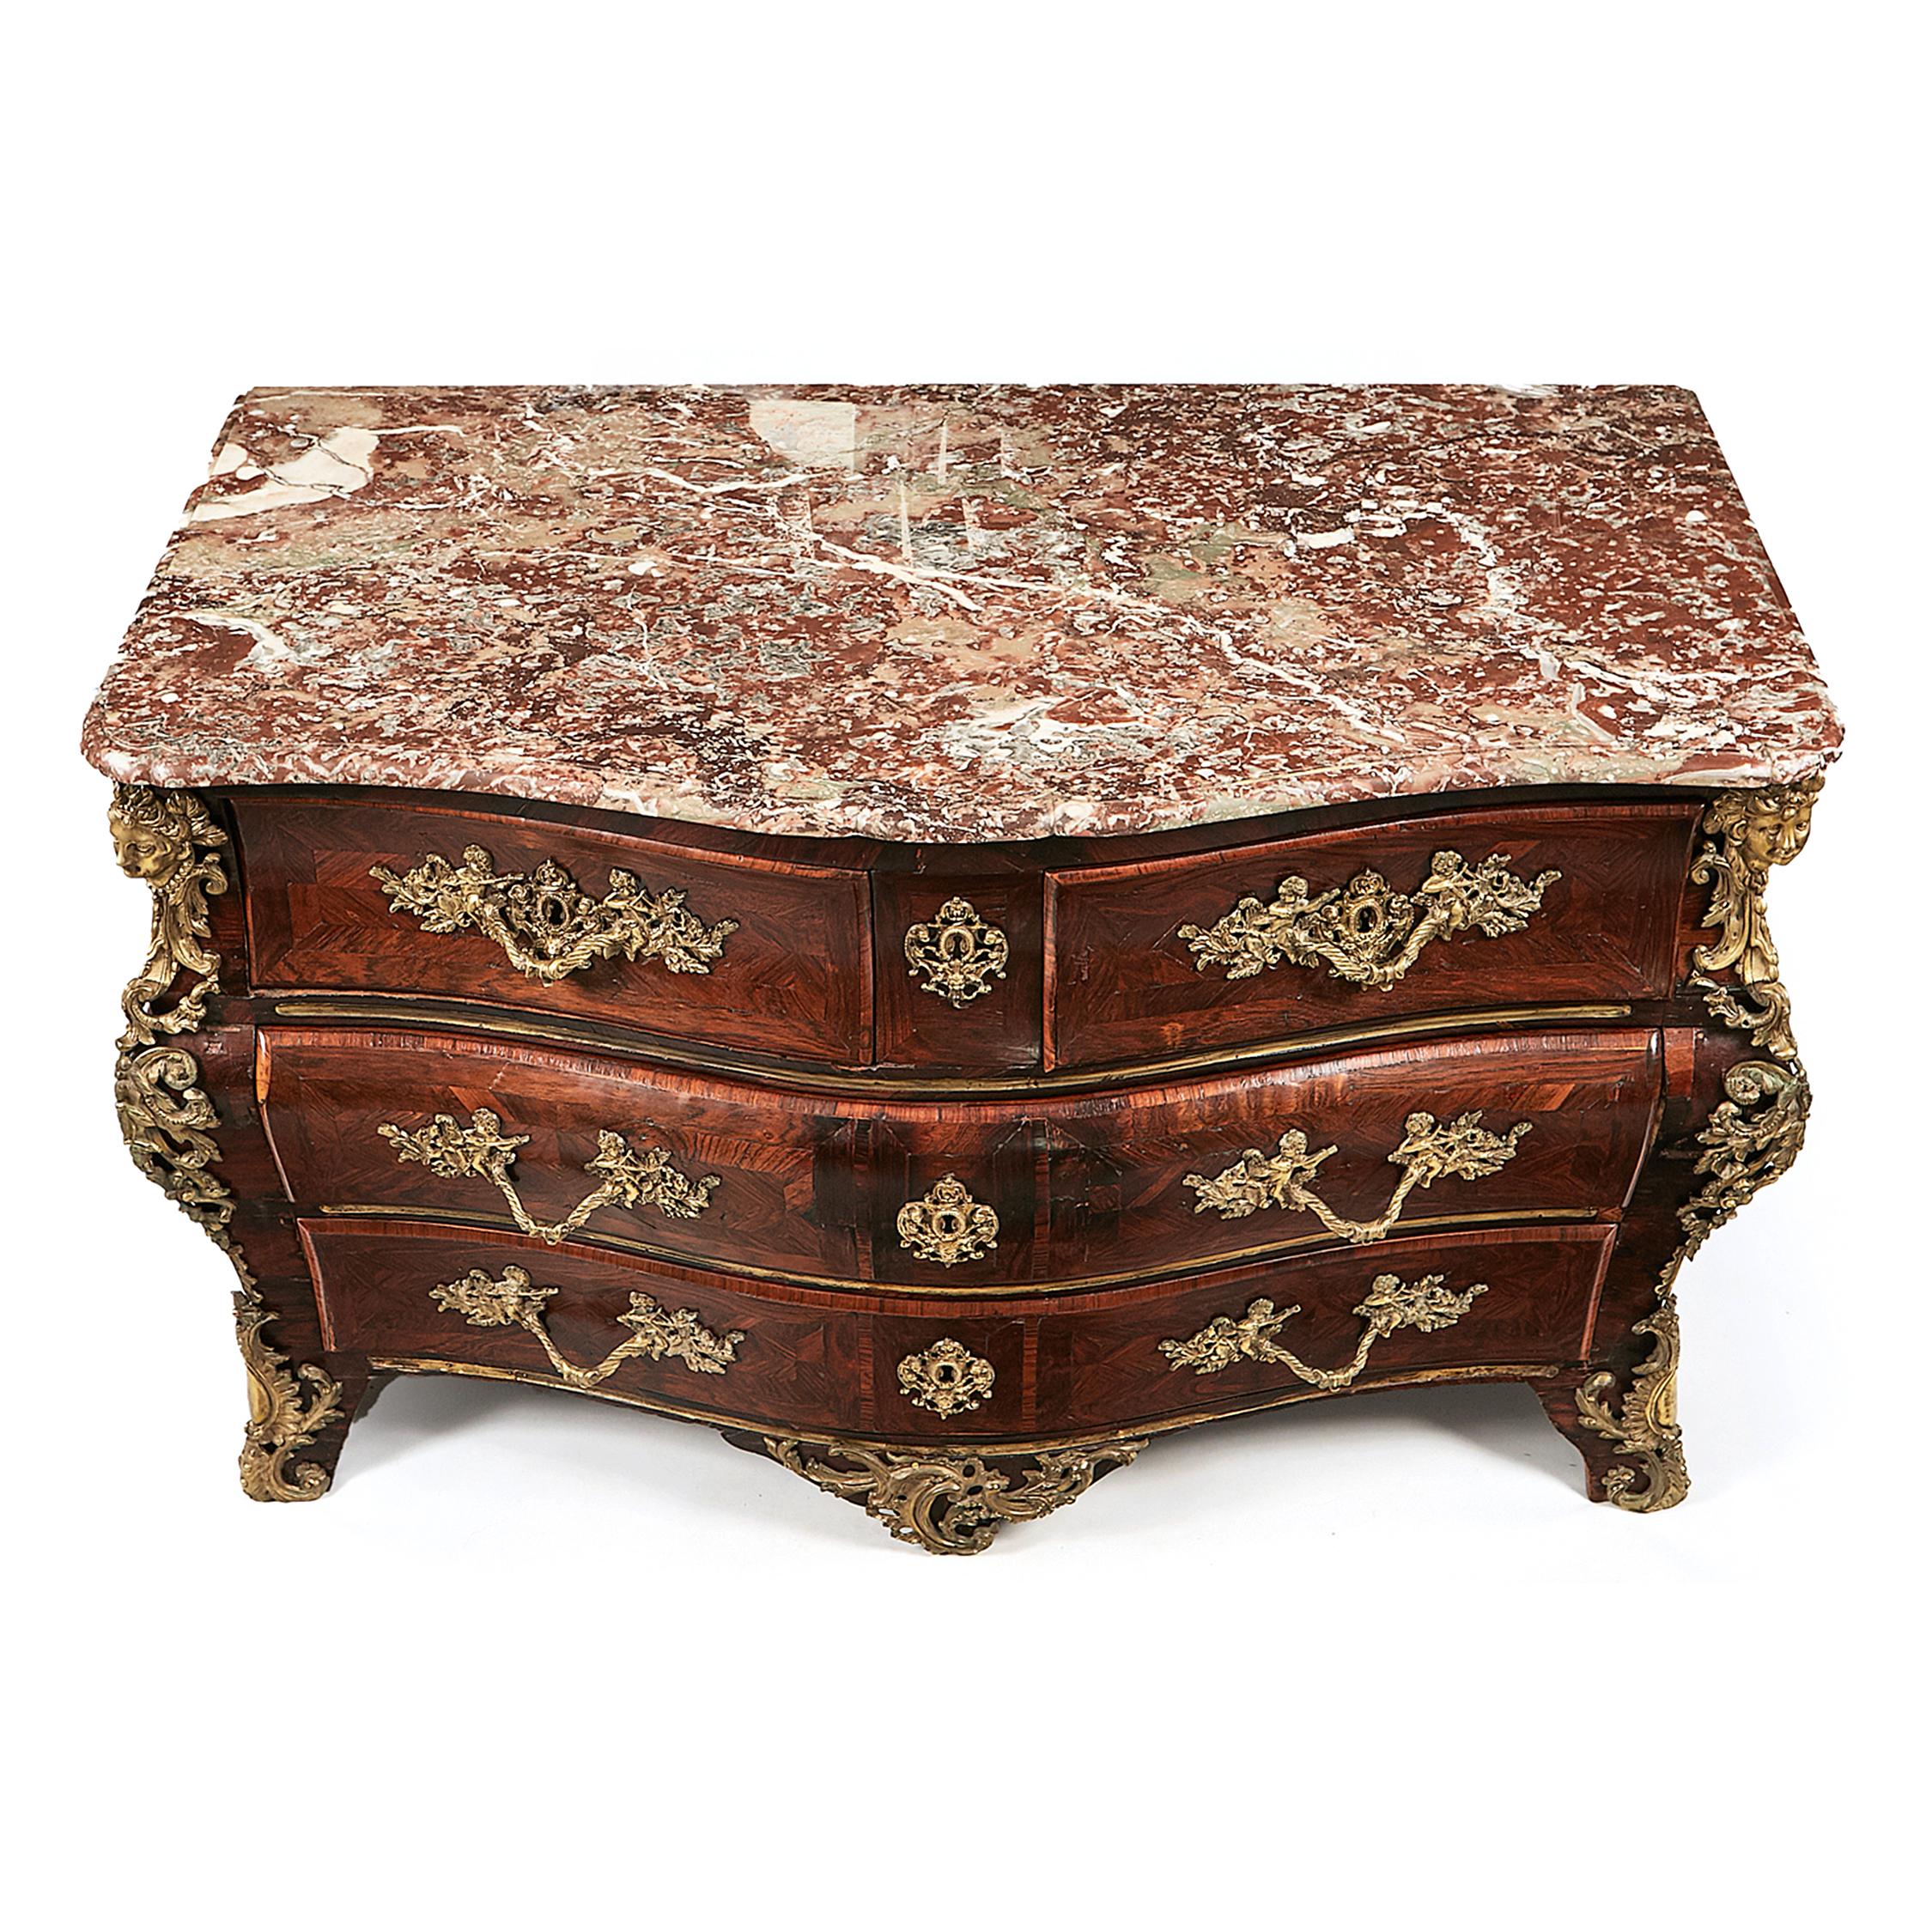 This early 18th-century French Louis XV marquetry bombé commode or chest of drawers, with a carved signature 